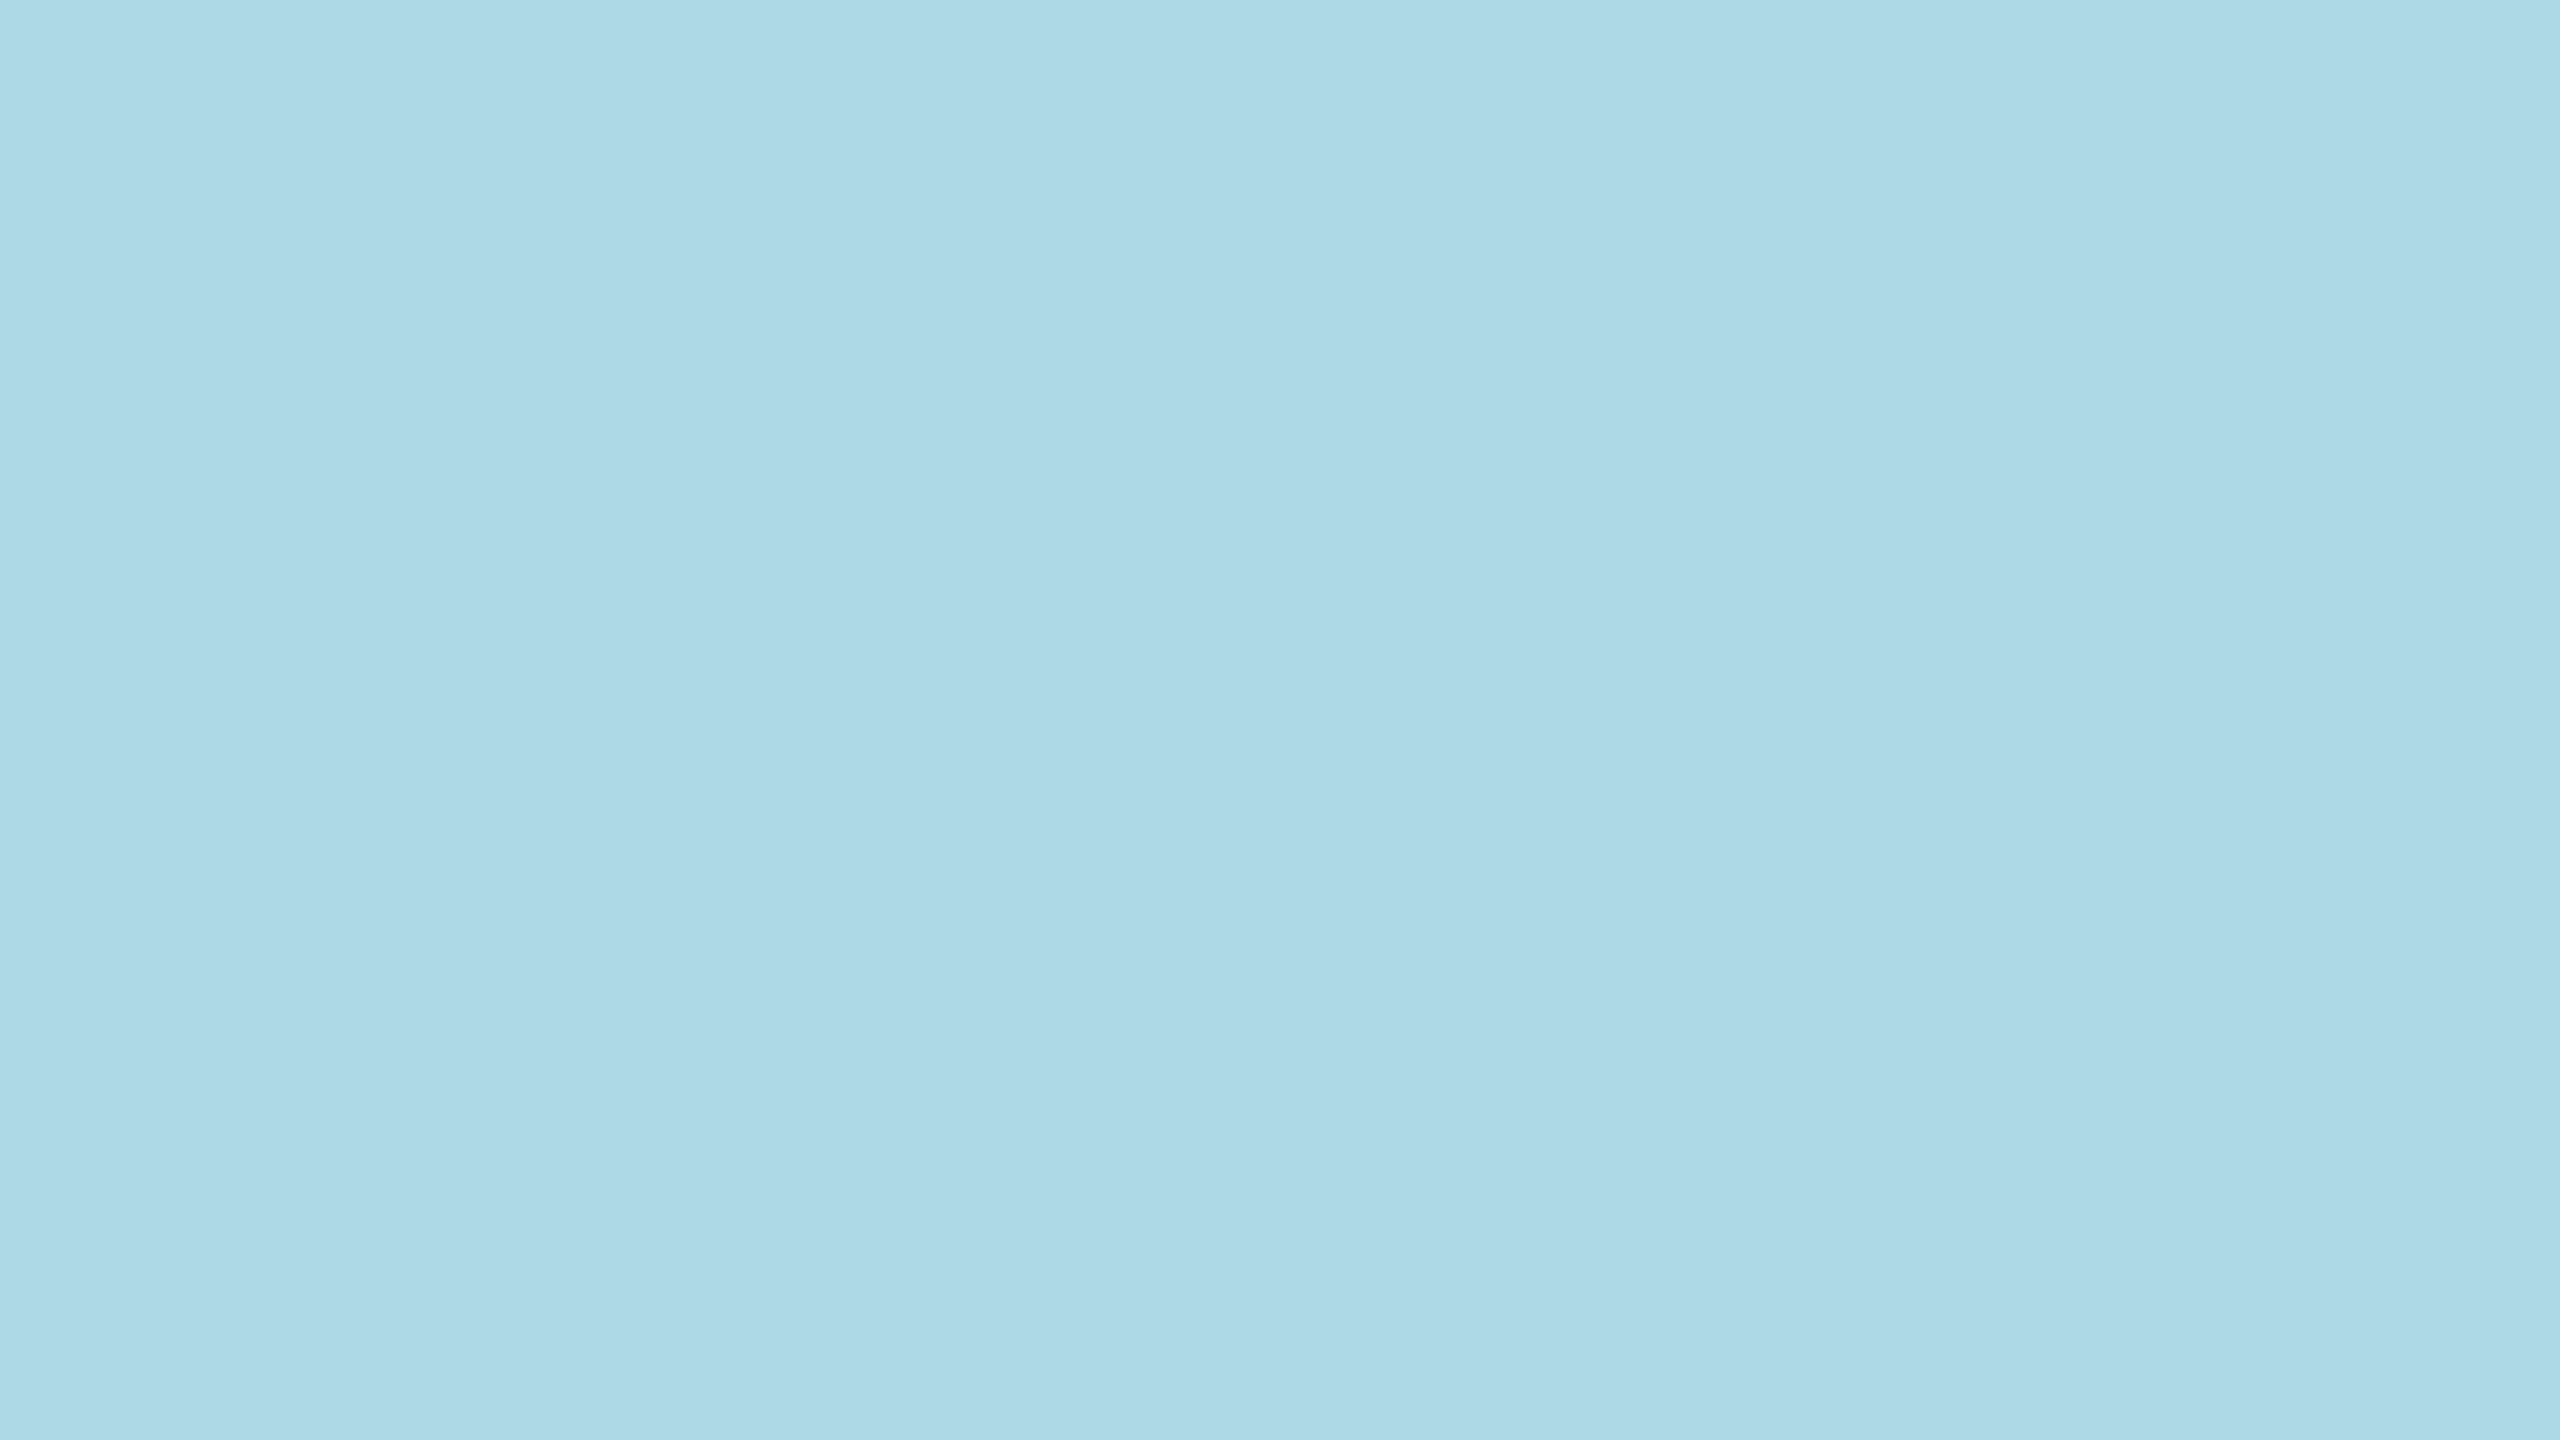 2560x1440 Solid Light Blue Wallpaper Magnificent  Light Blue solid Color  Background Inclusivegrowth